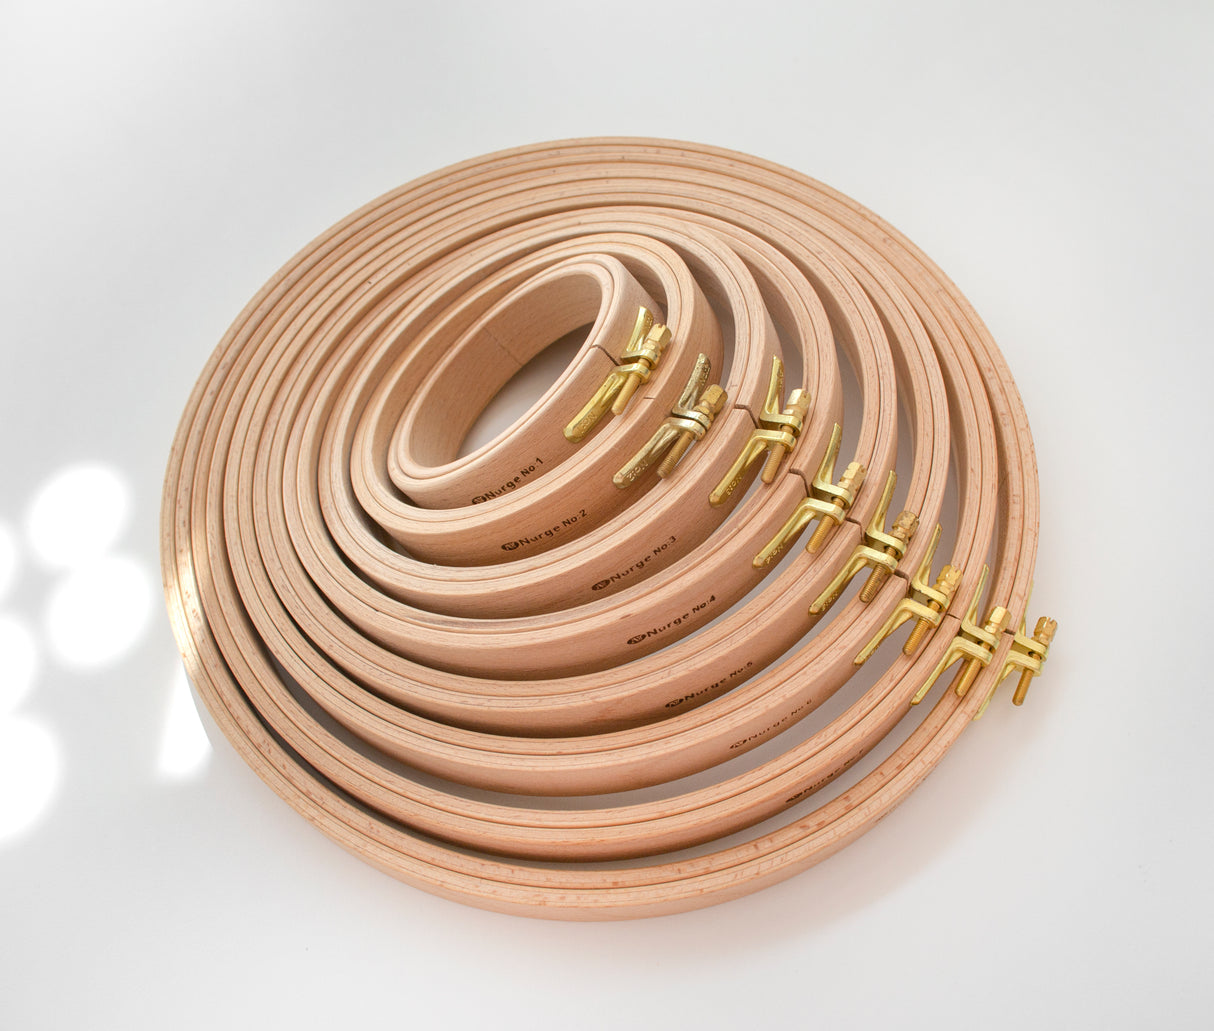 100 Circular Wooden Frame 8mm Nurge: Perfect Tension and Natural Finish for your Embroidery Projects